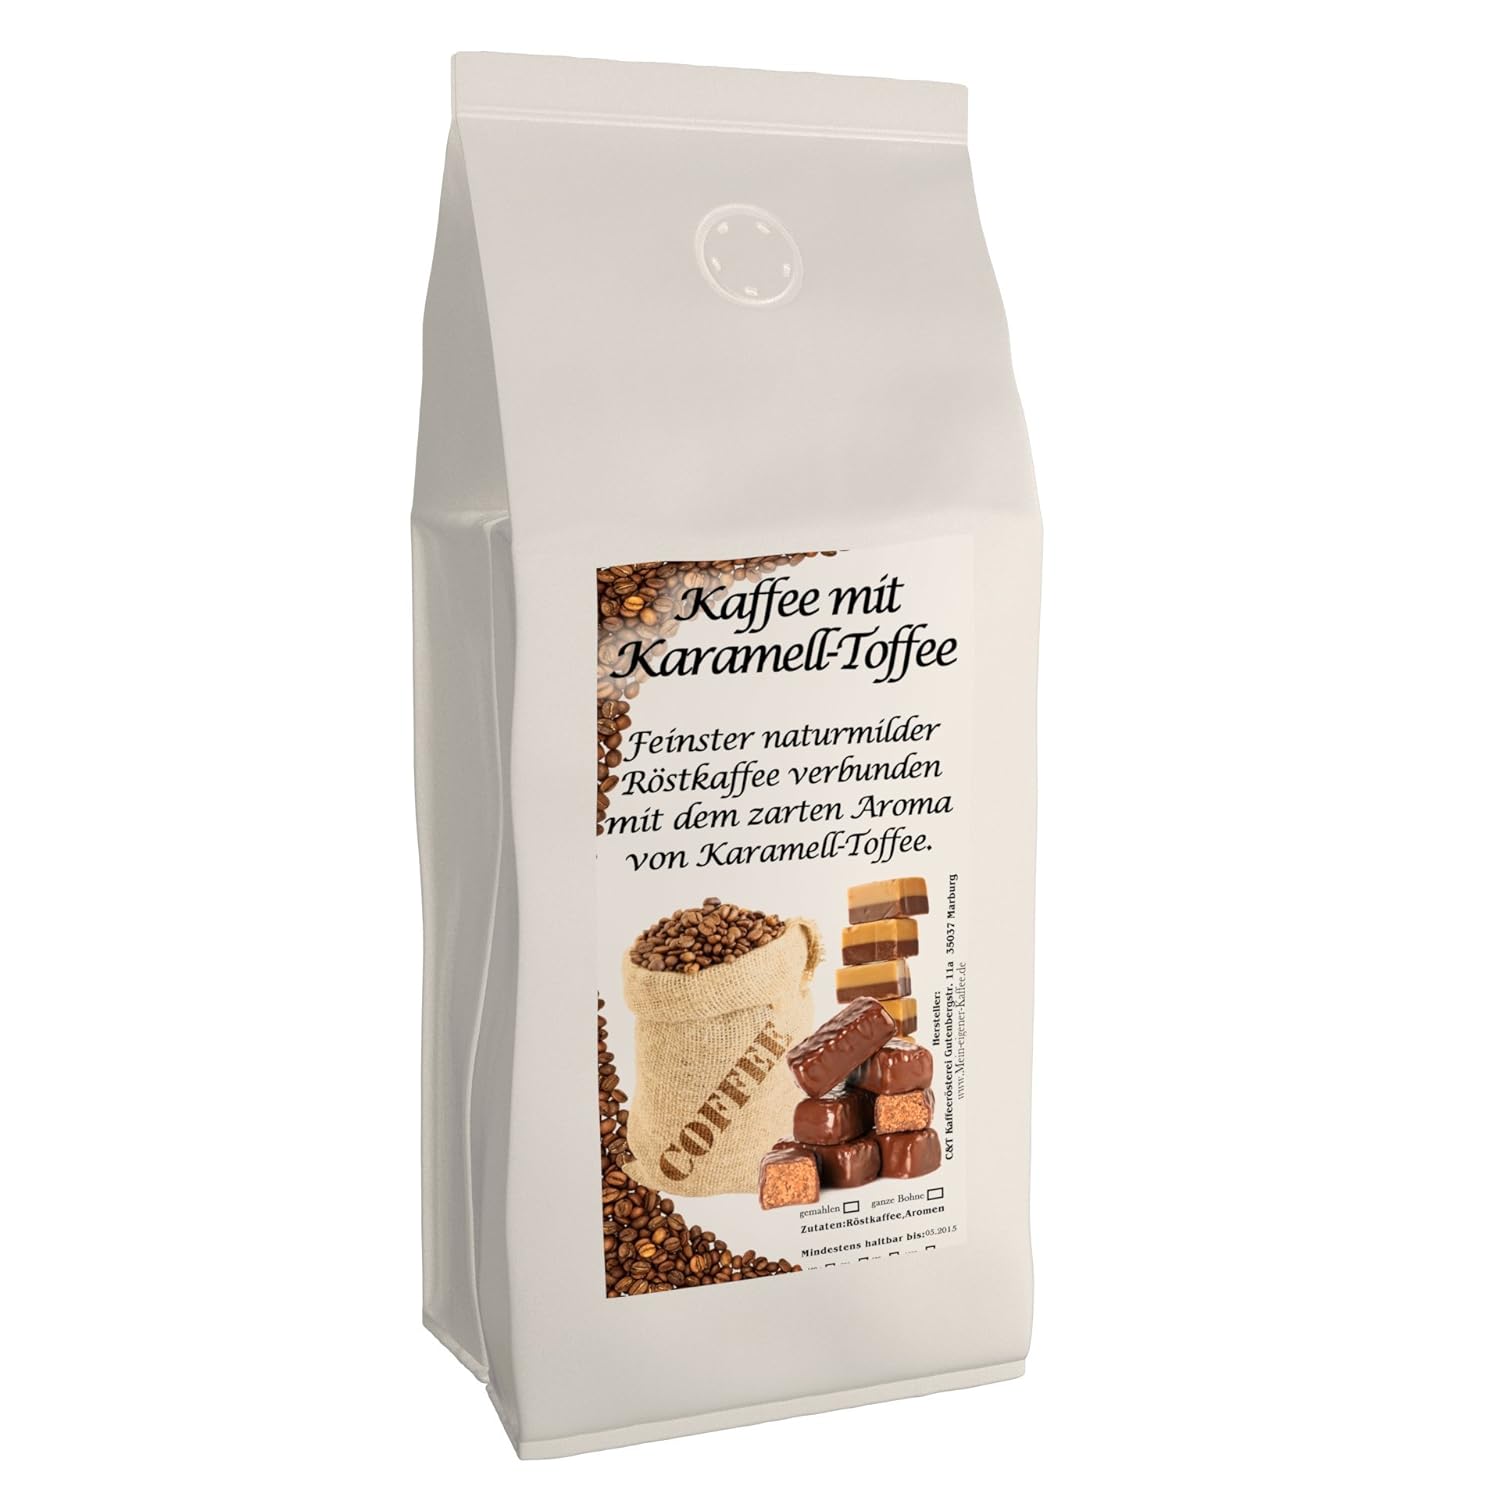 Aroma Coffee - Flavored Coffee - Caramel 1000 g - Ground - Top Coffee - Gentle and Fresh Roasted in Own Roastery